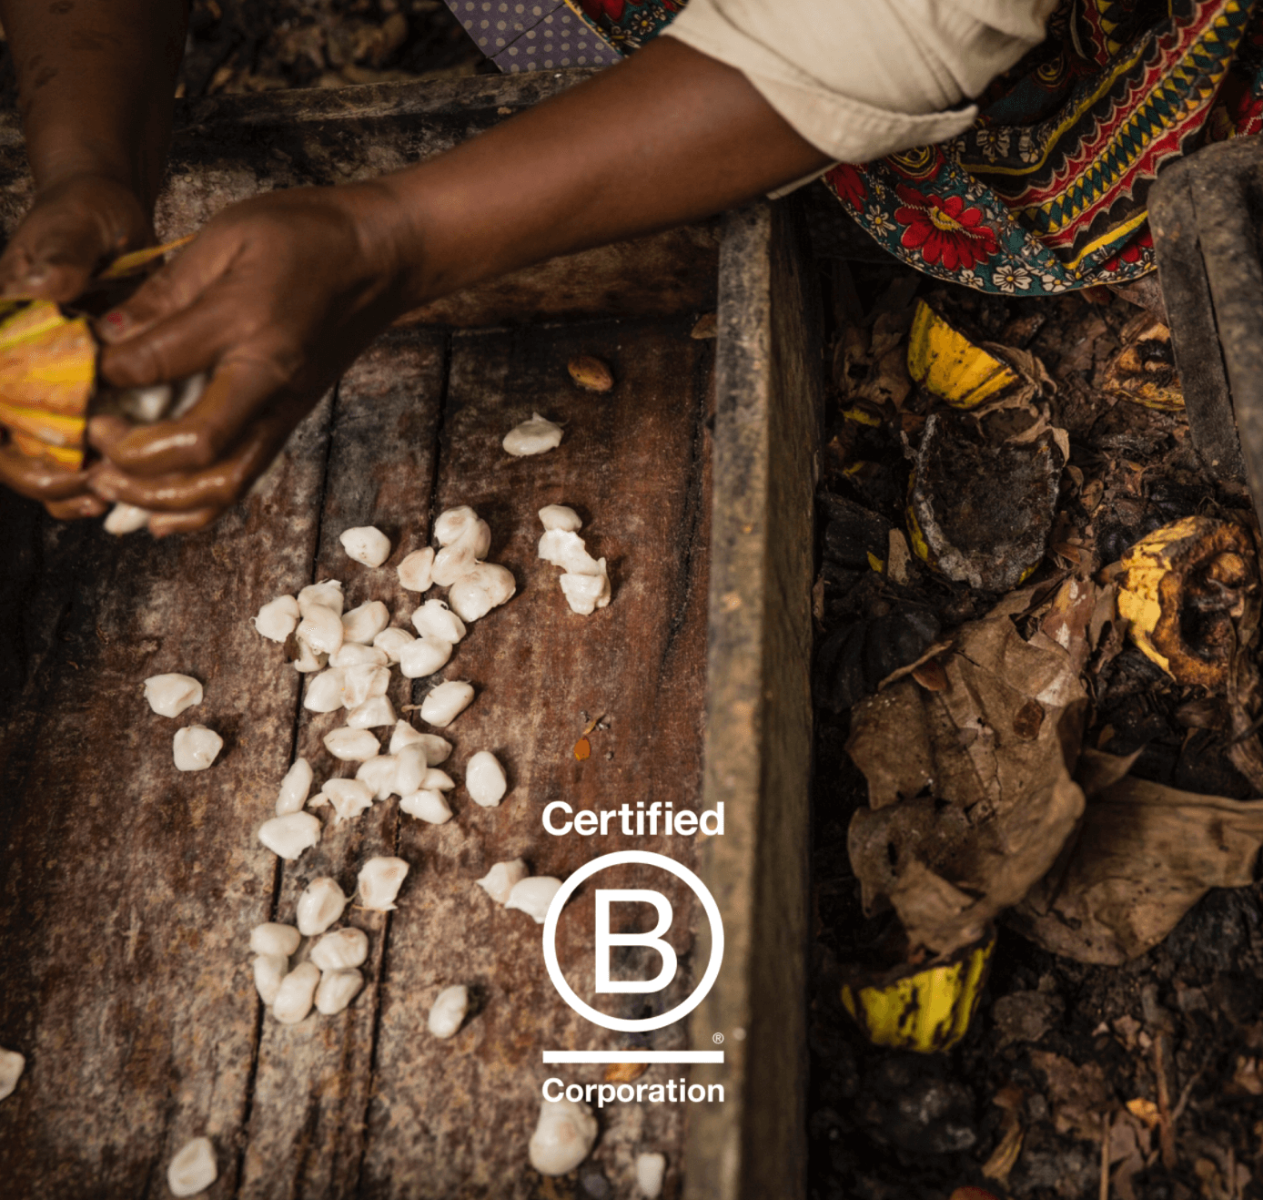 B Corp: The Future of the Cocoa Industry